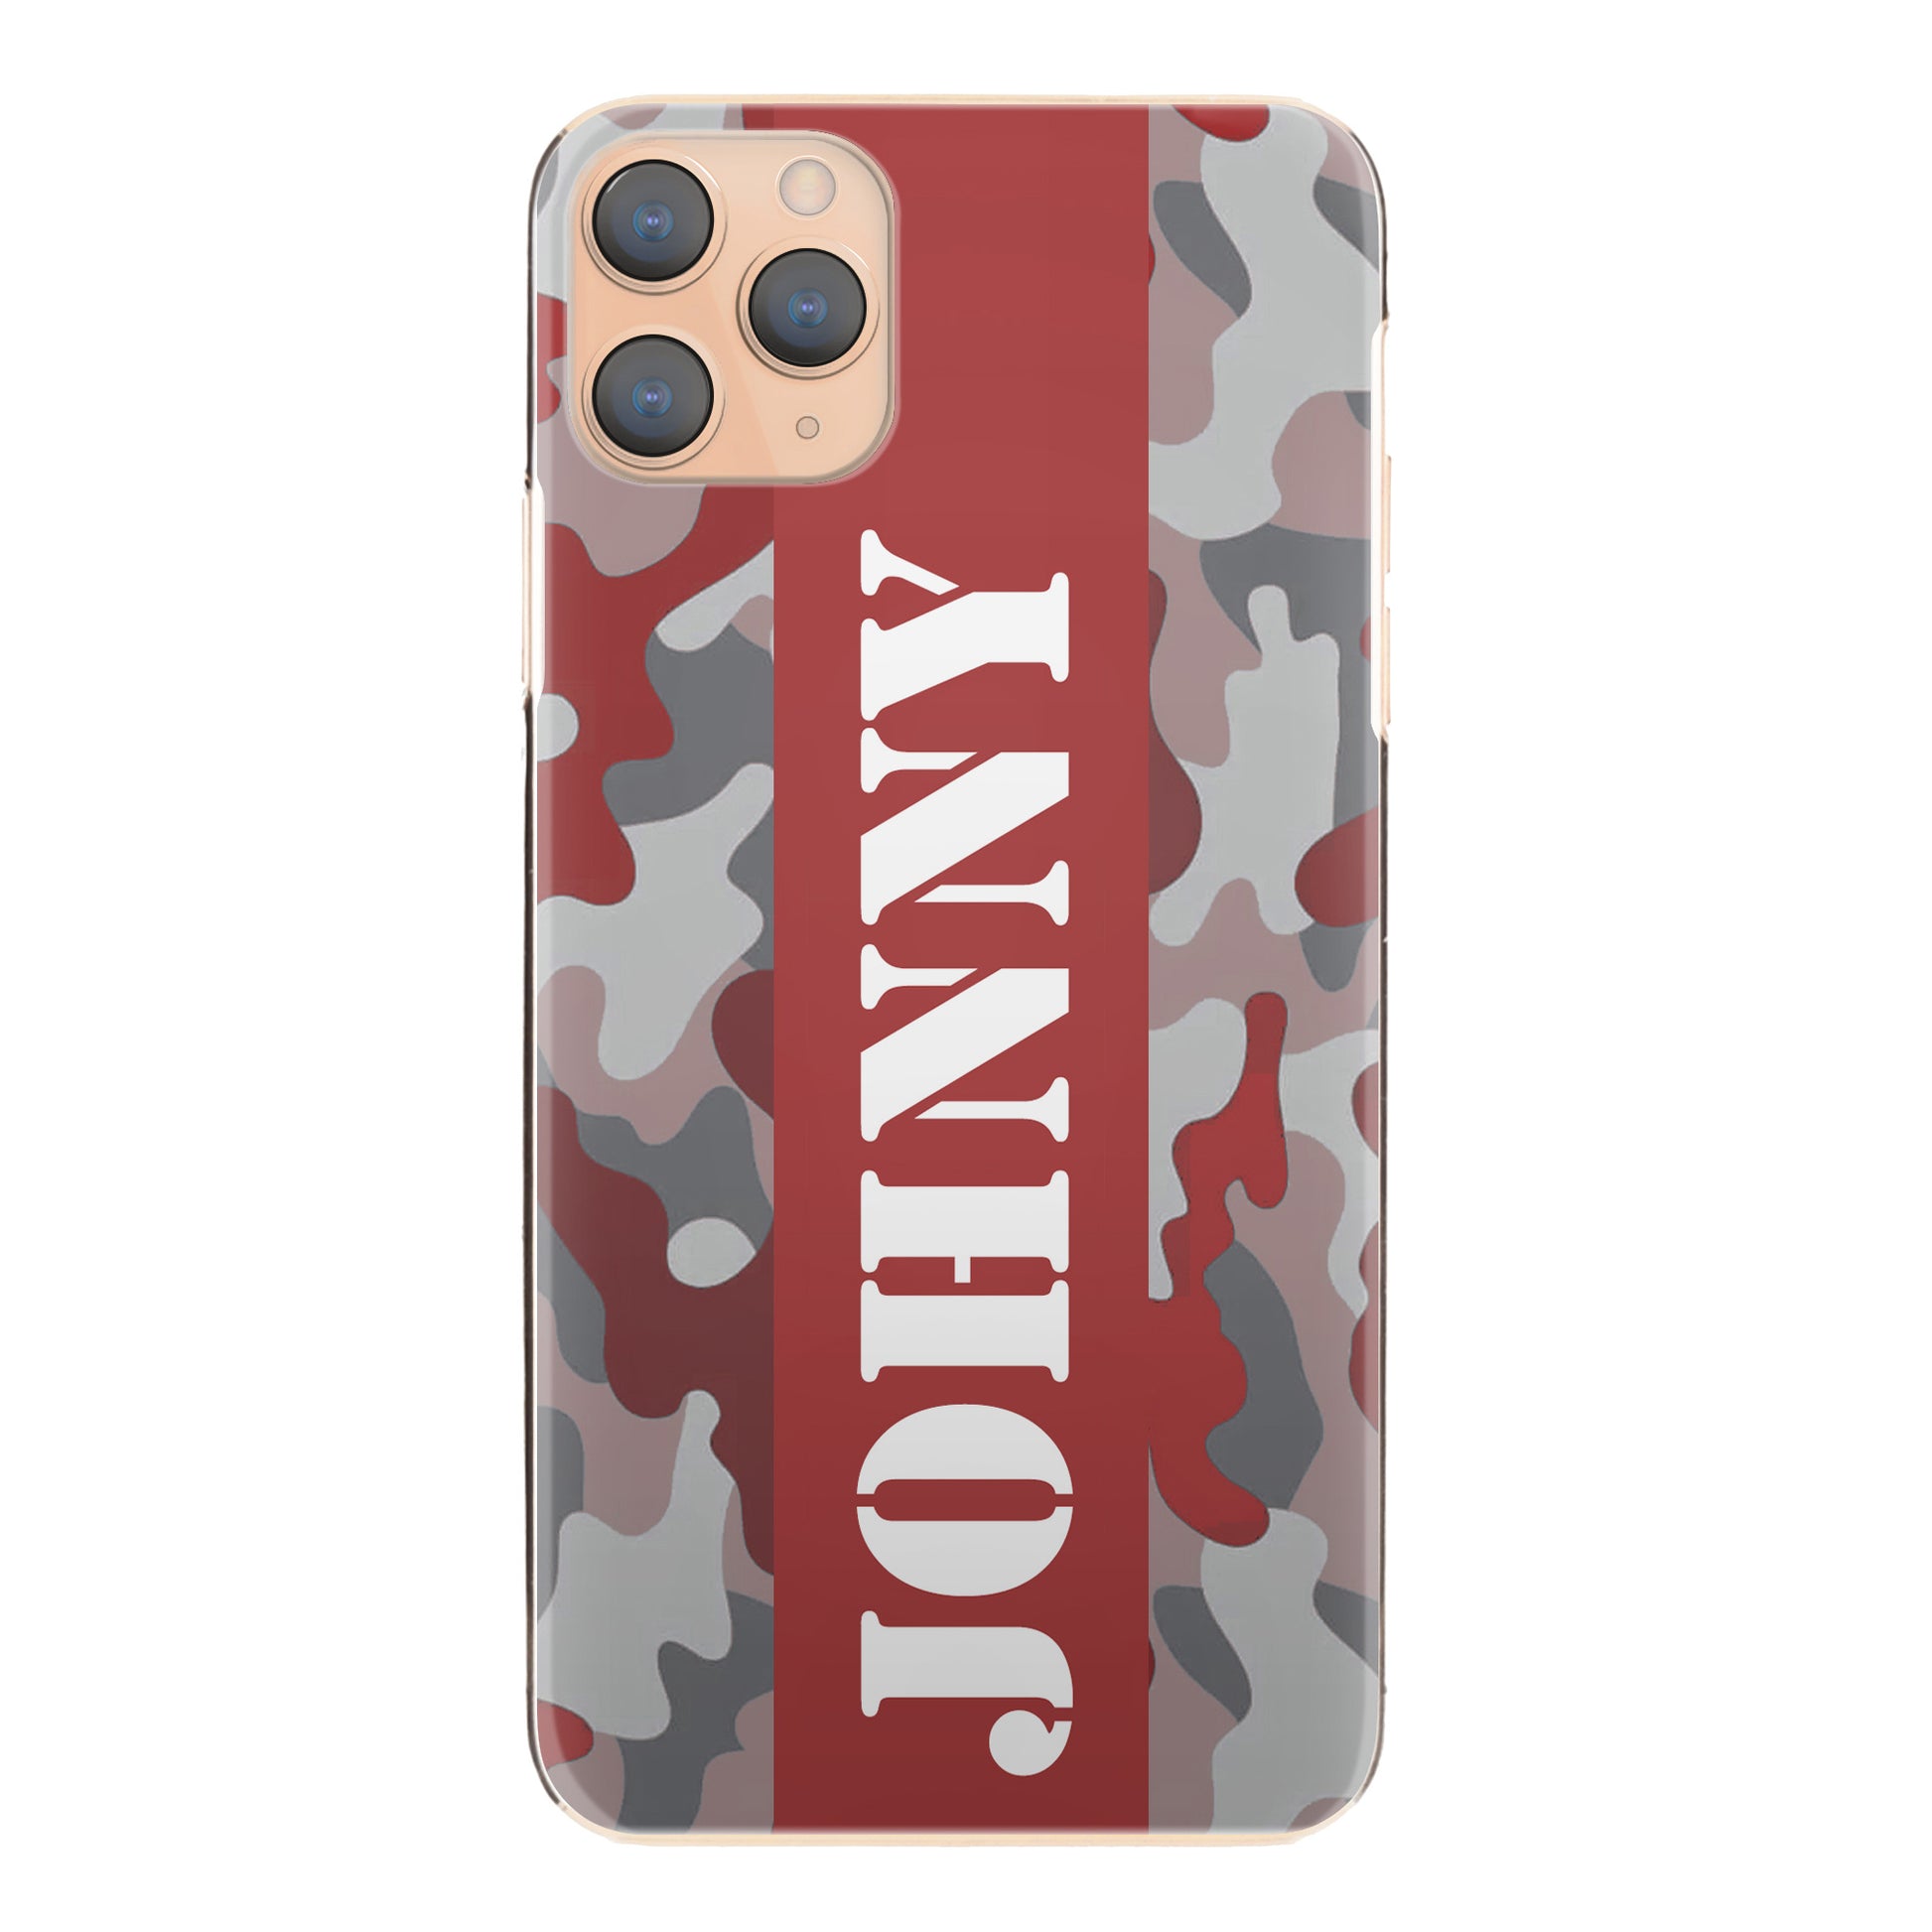 Personalised Motorola Phone Hard Case with Military Text on Red Camo